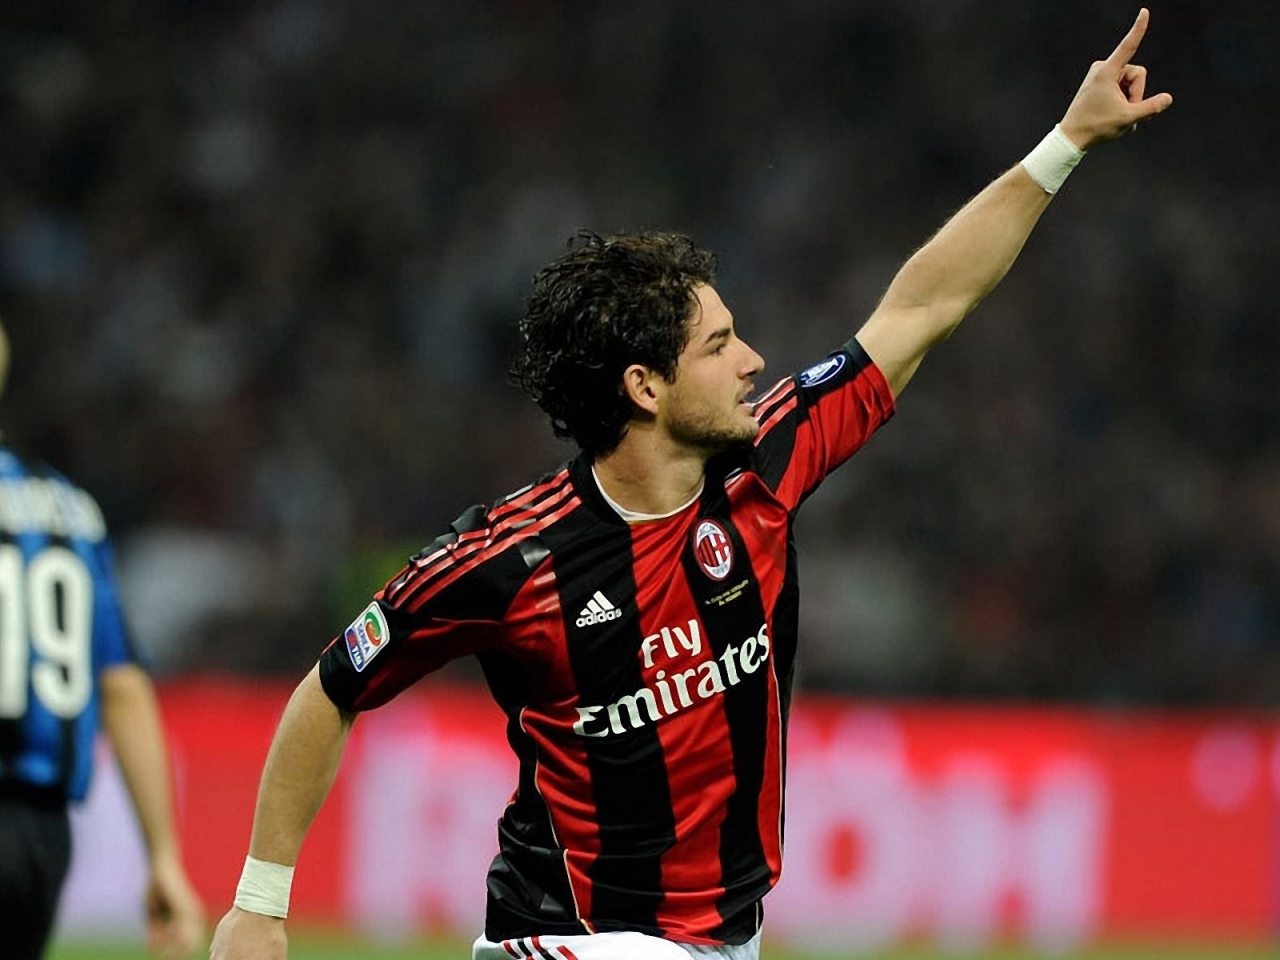 Alexandre Pato for 1280 x 960 resolution